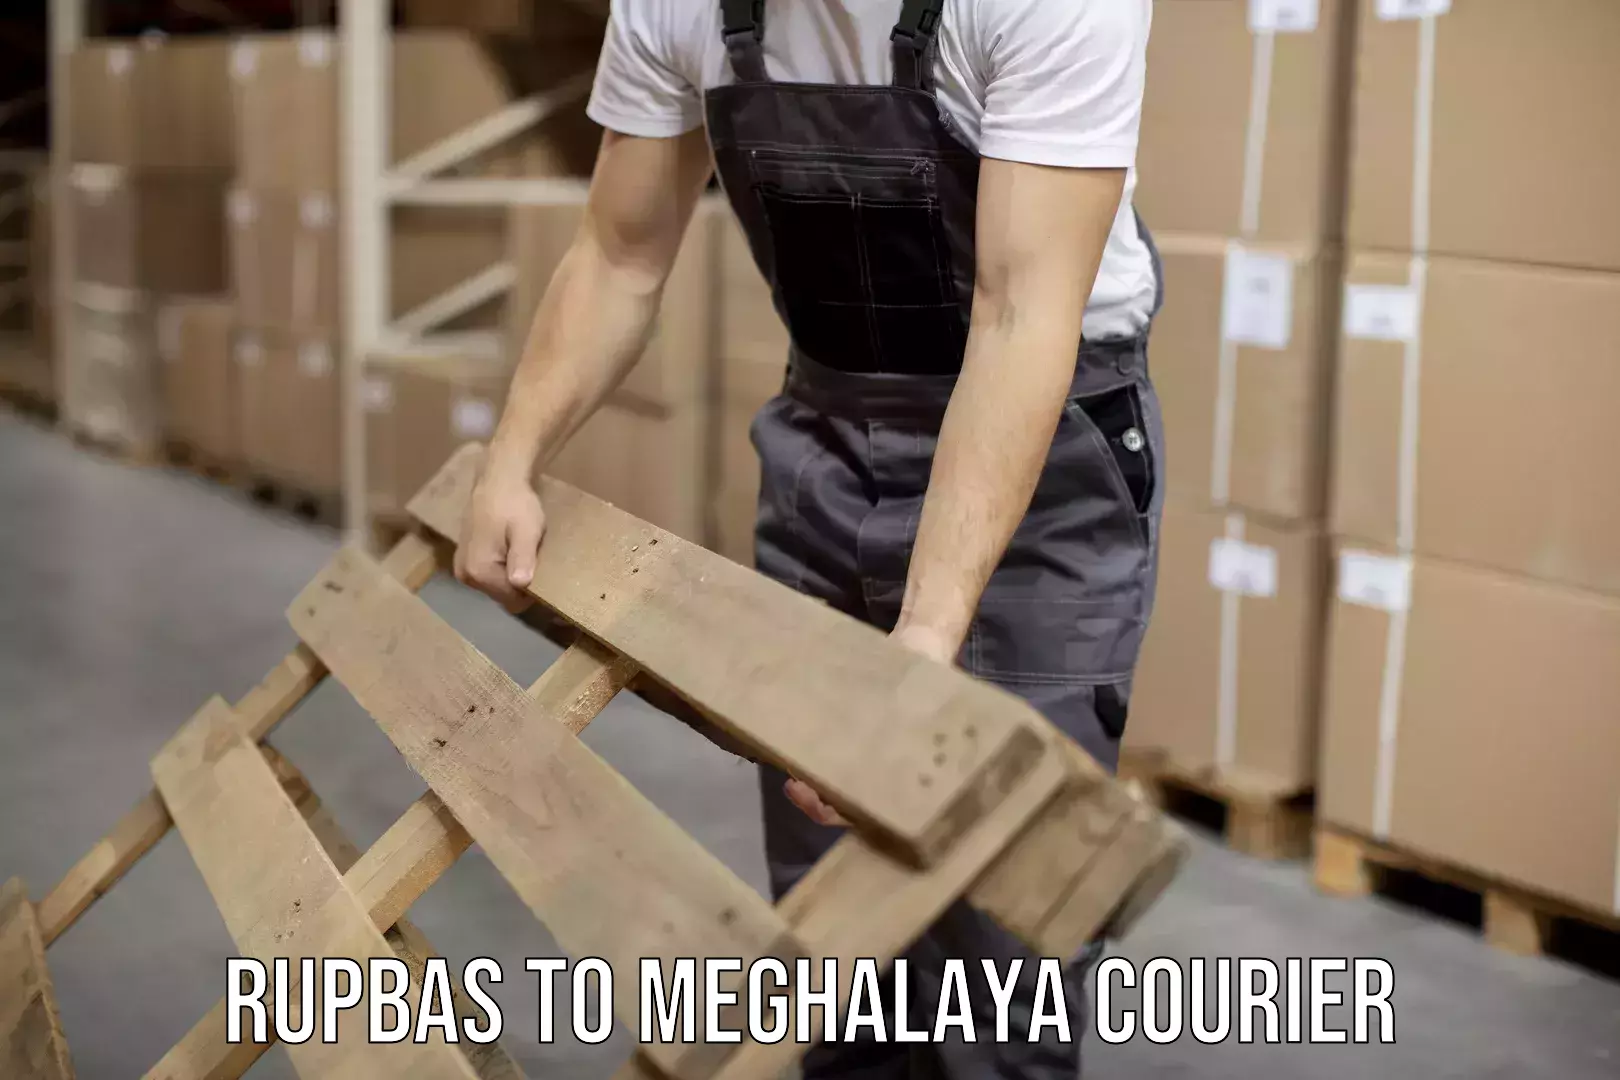 Local delivery service Rupbas to Meghalaya